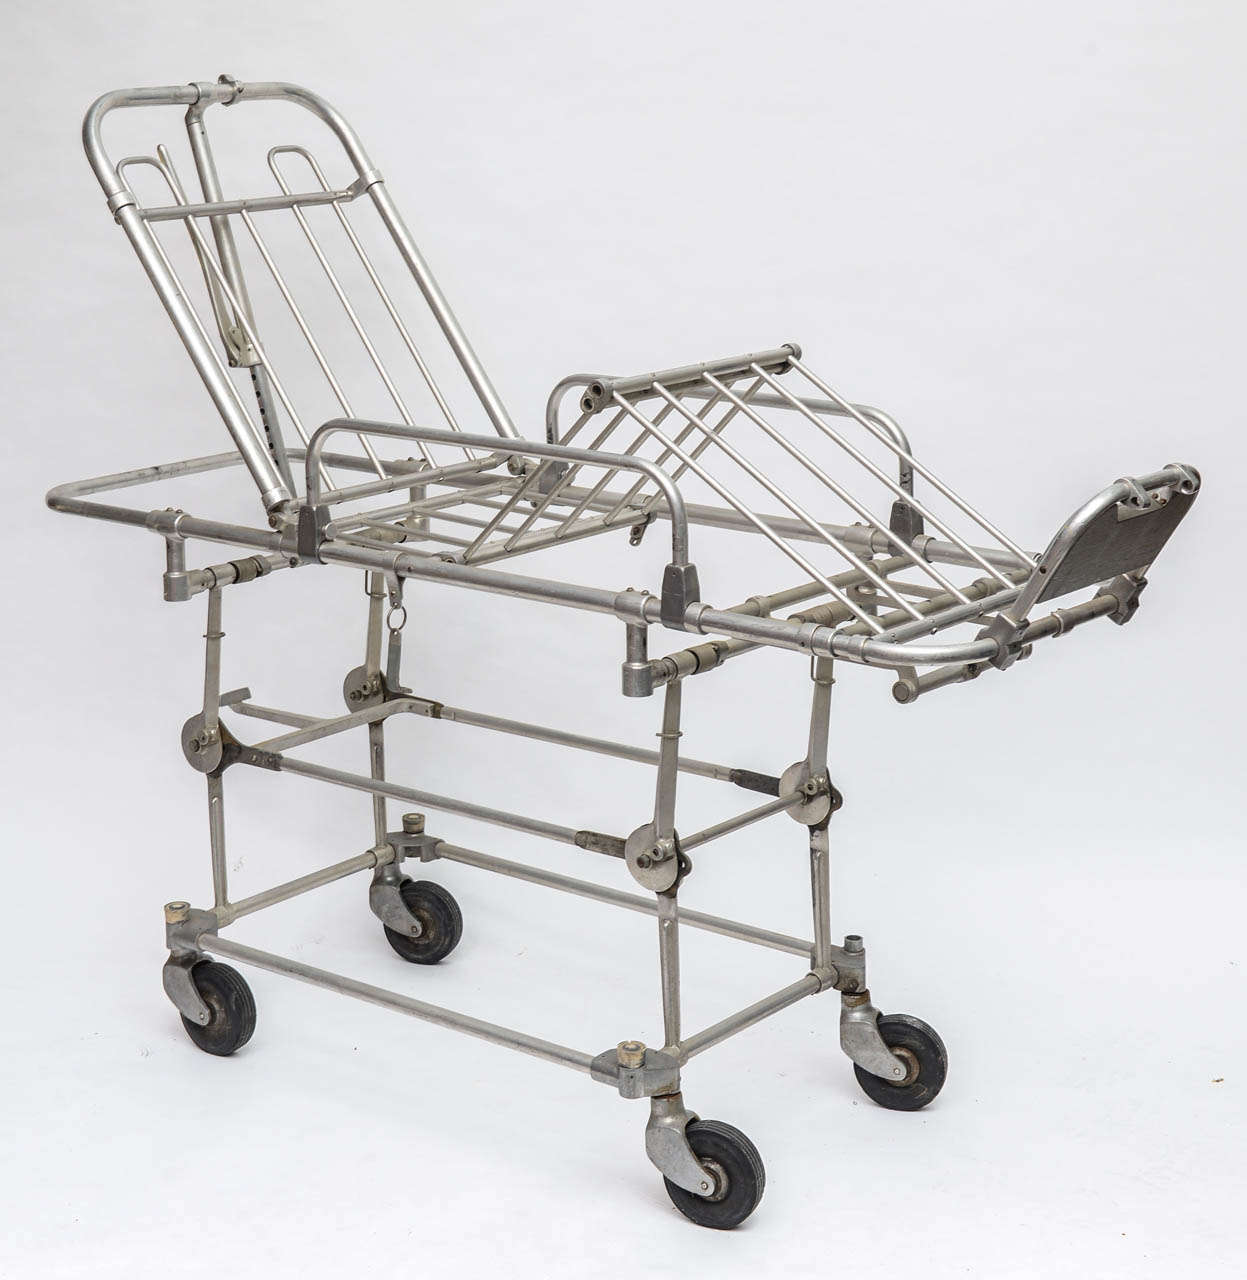 Really cool, vintage industrial hospital gurney. Aluminum frame w/ rubber wheels and original red padding (see additional images which include photo of gurney w/ padding). Fully adjustable. Think outside of the box on this one and add glass shelves